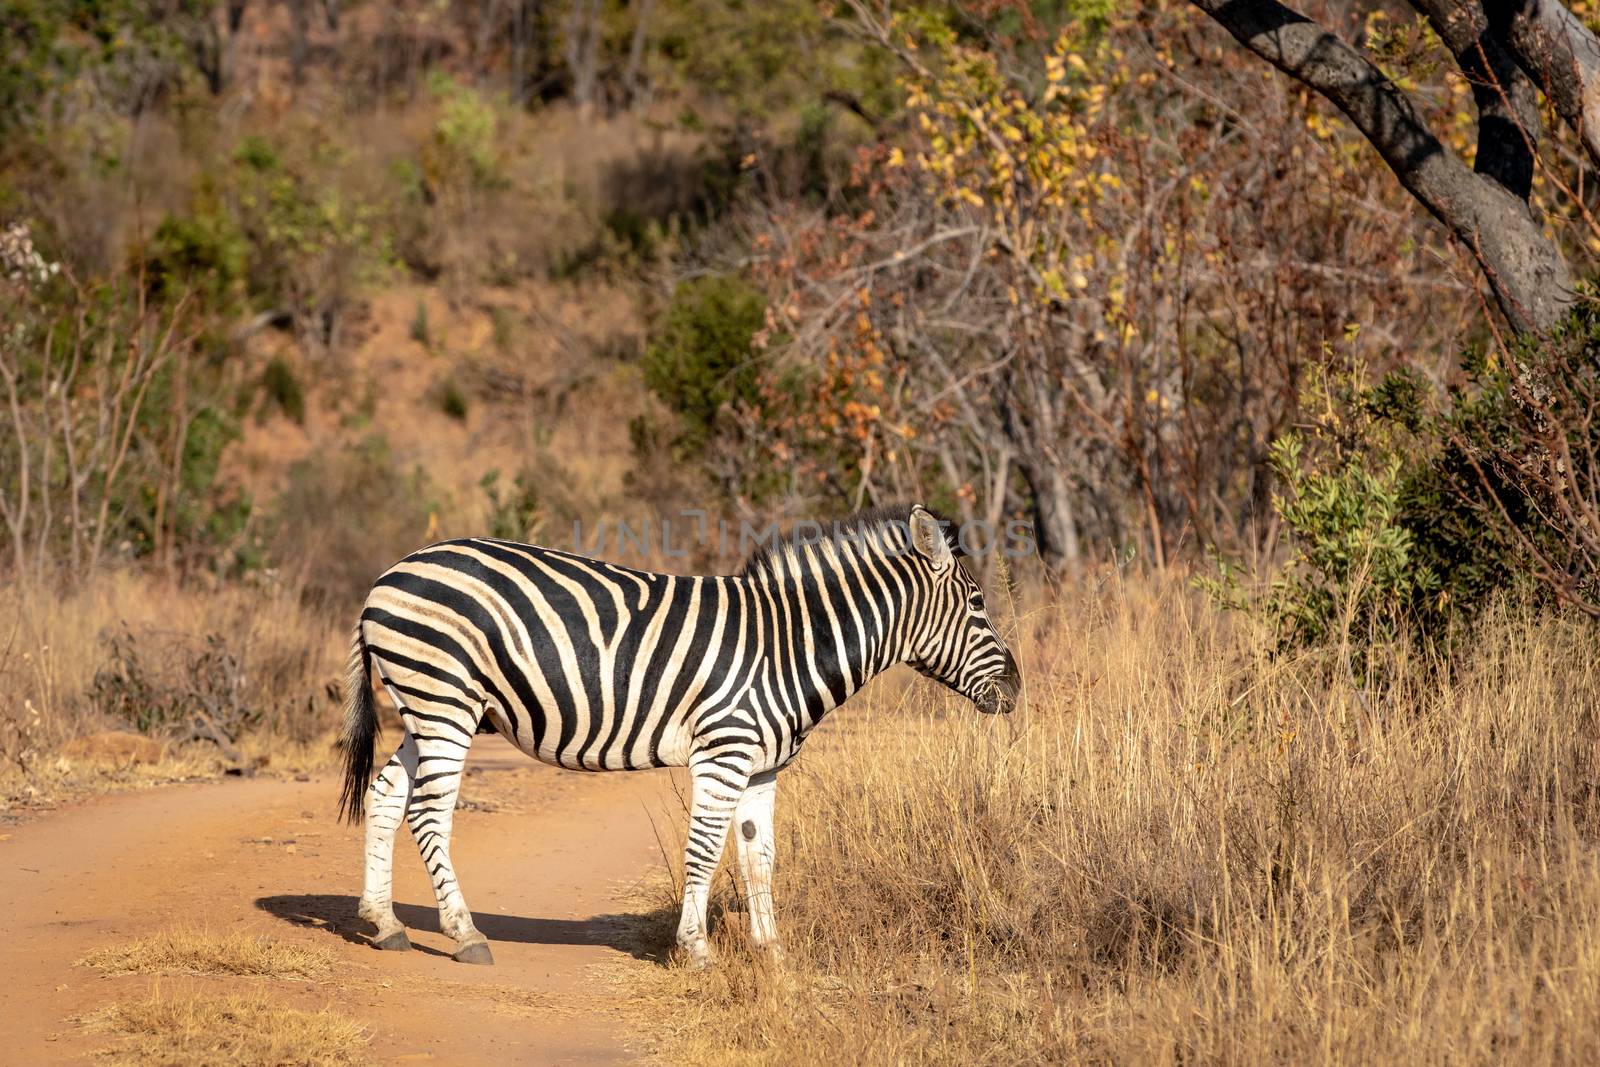 Zebra standing in the road in the Welgevonden game reserve, South Africa.